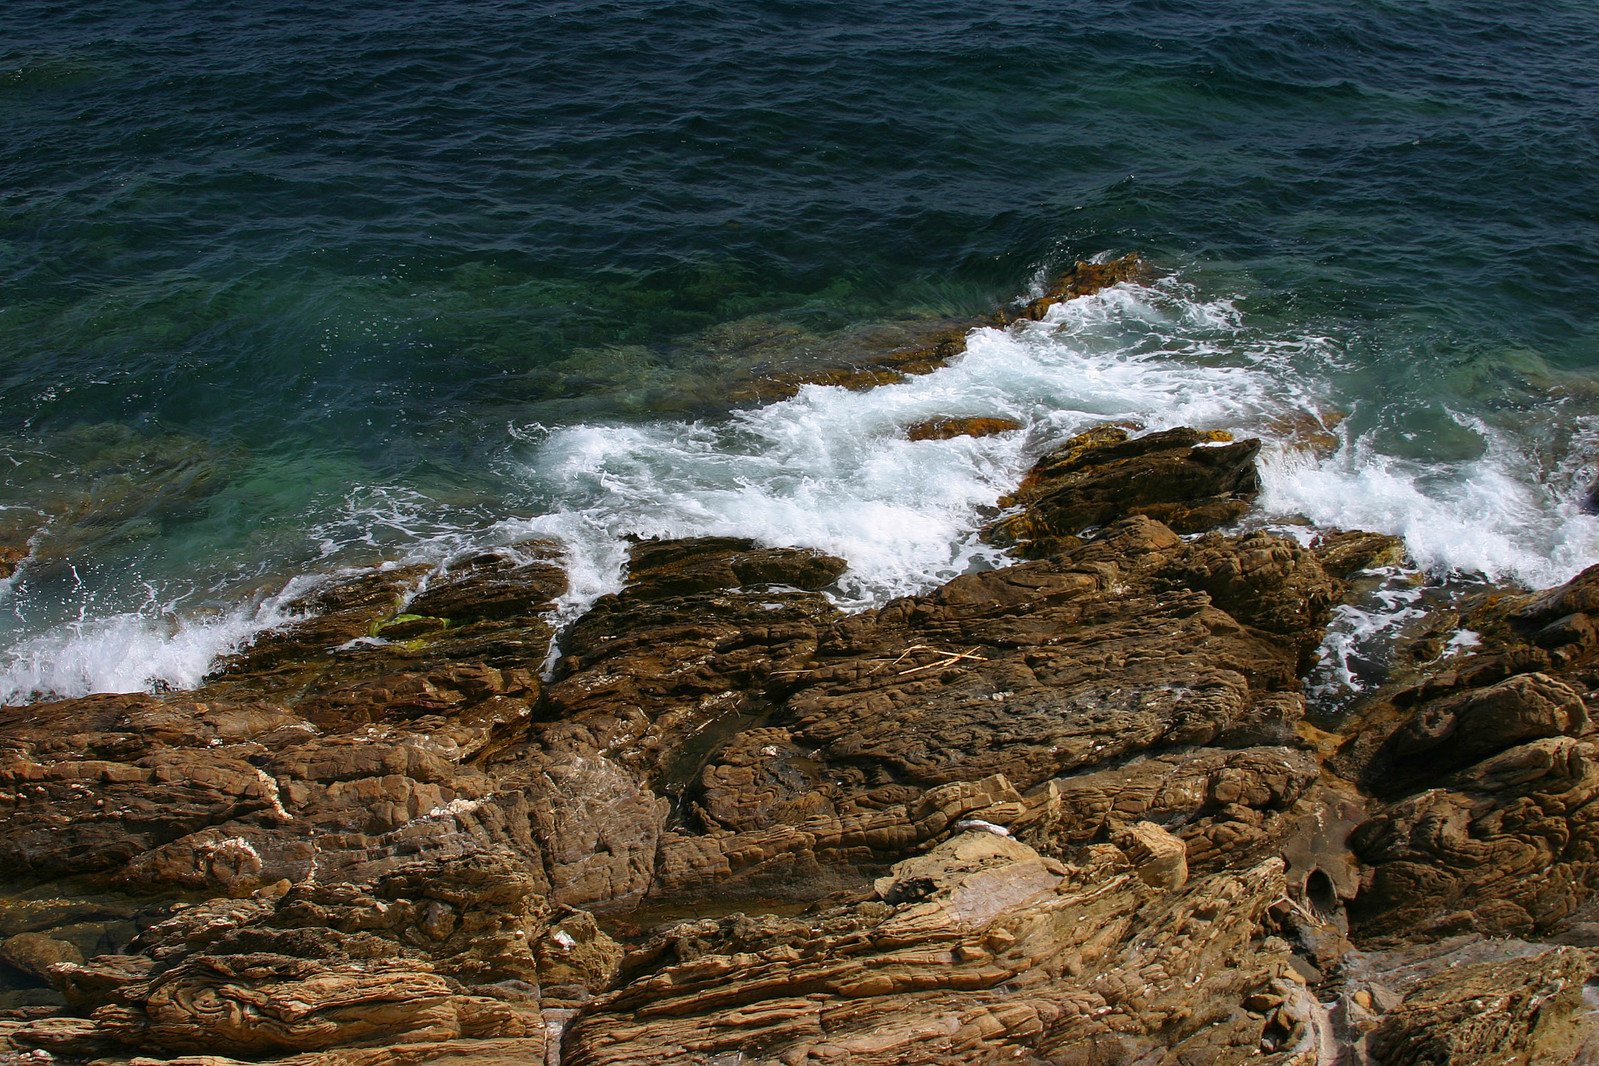 the view of an ocean with a rocky outcropping